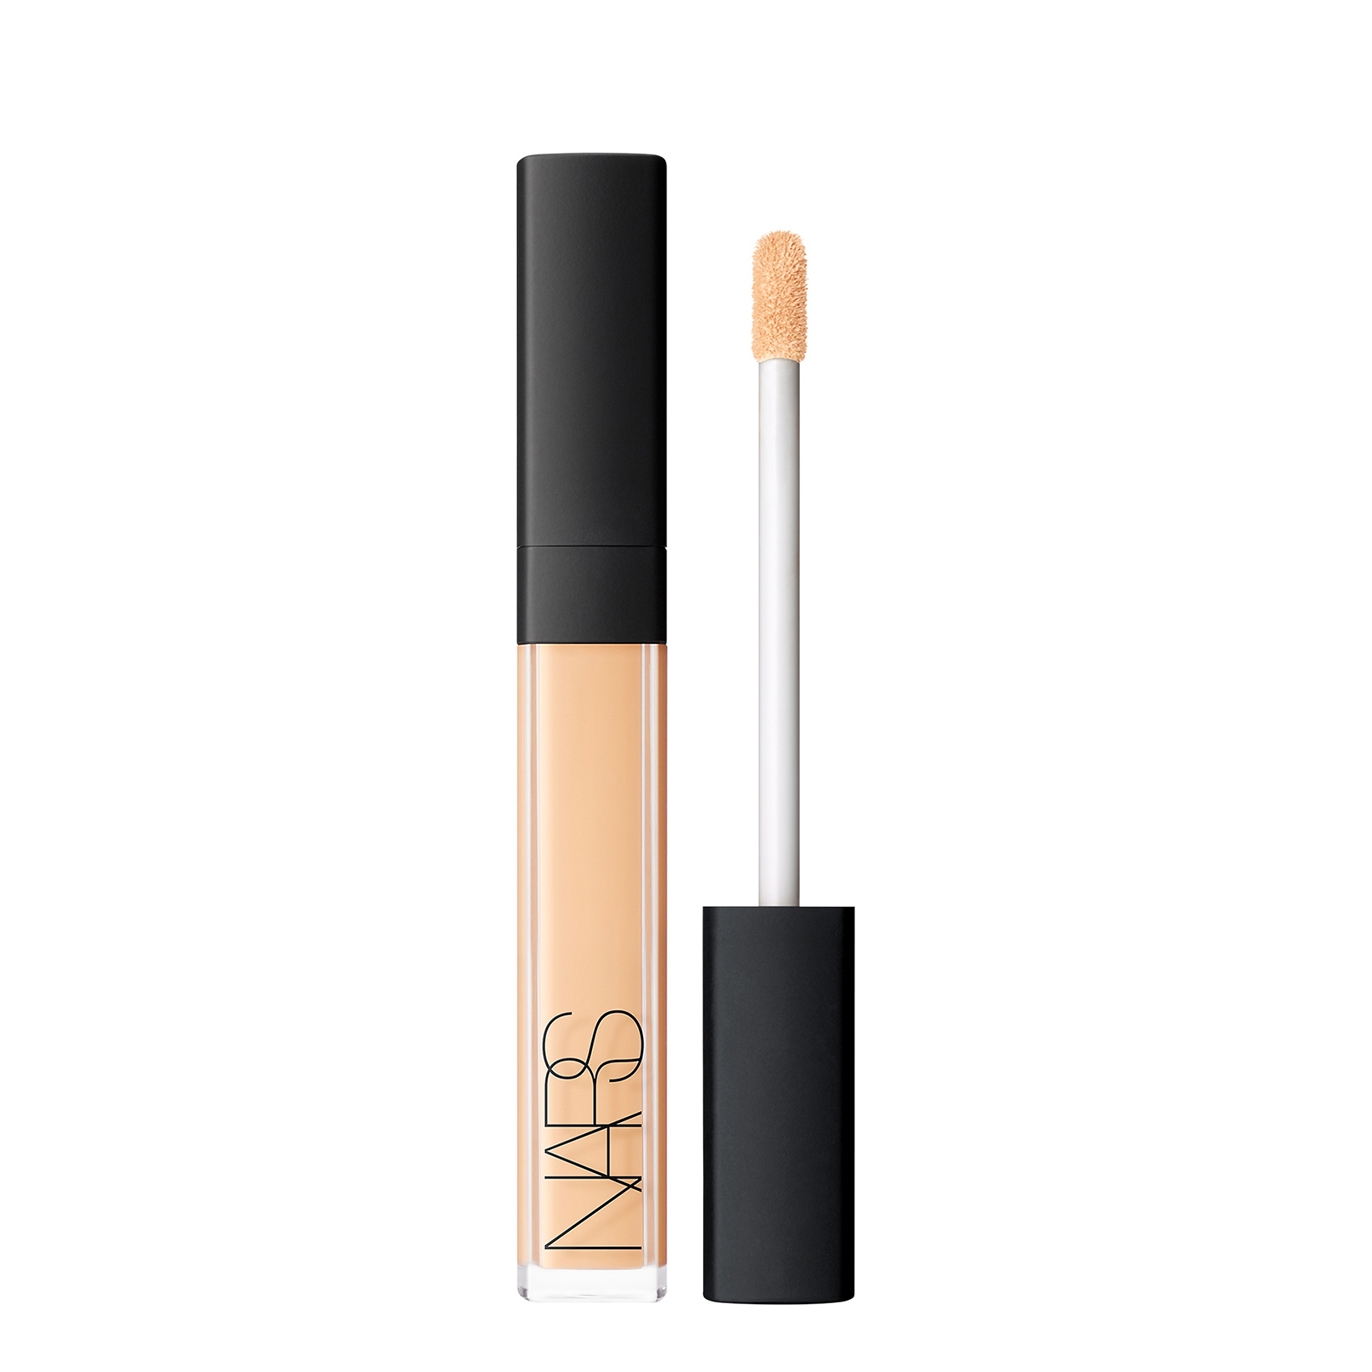 Nars Radiant Creamy Concealer 6ml - Colour Marron Glace